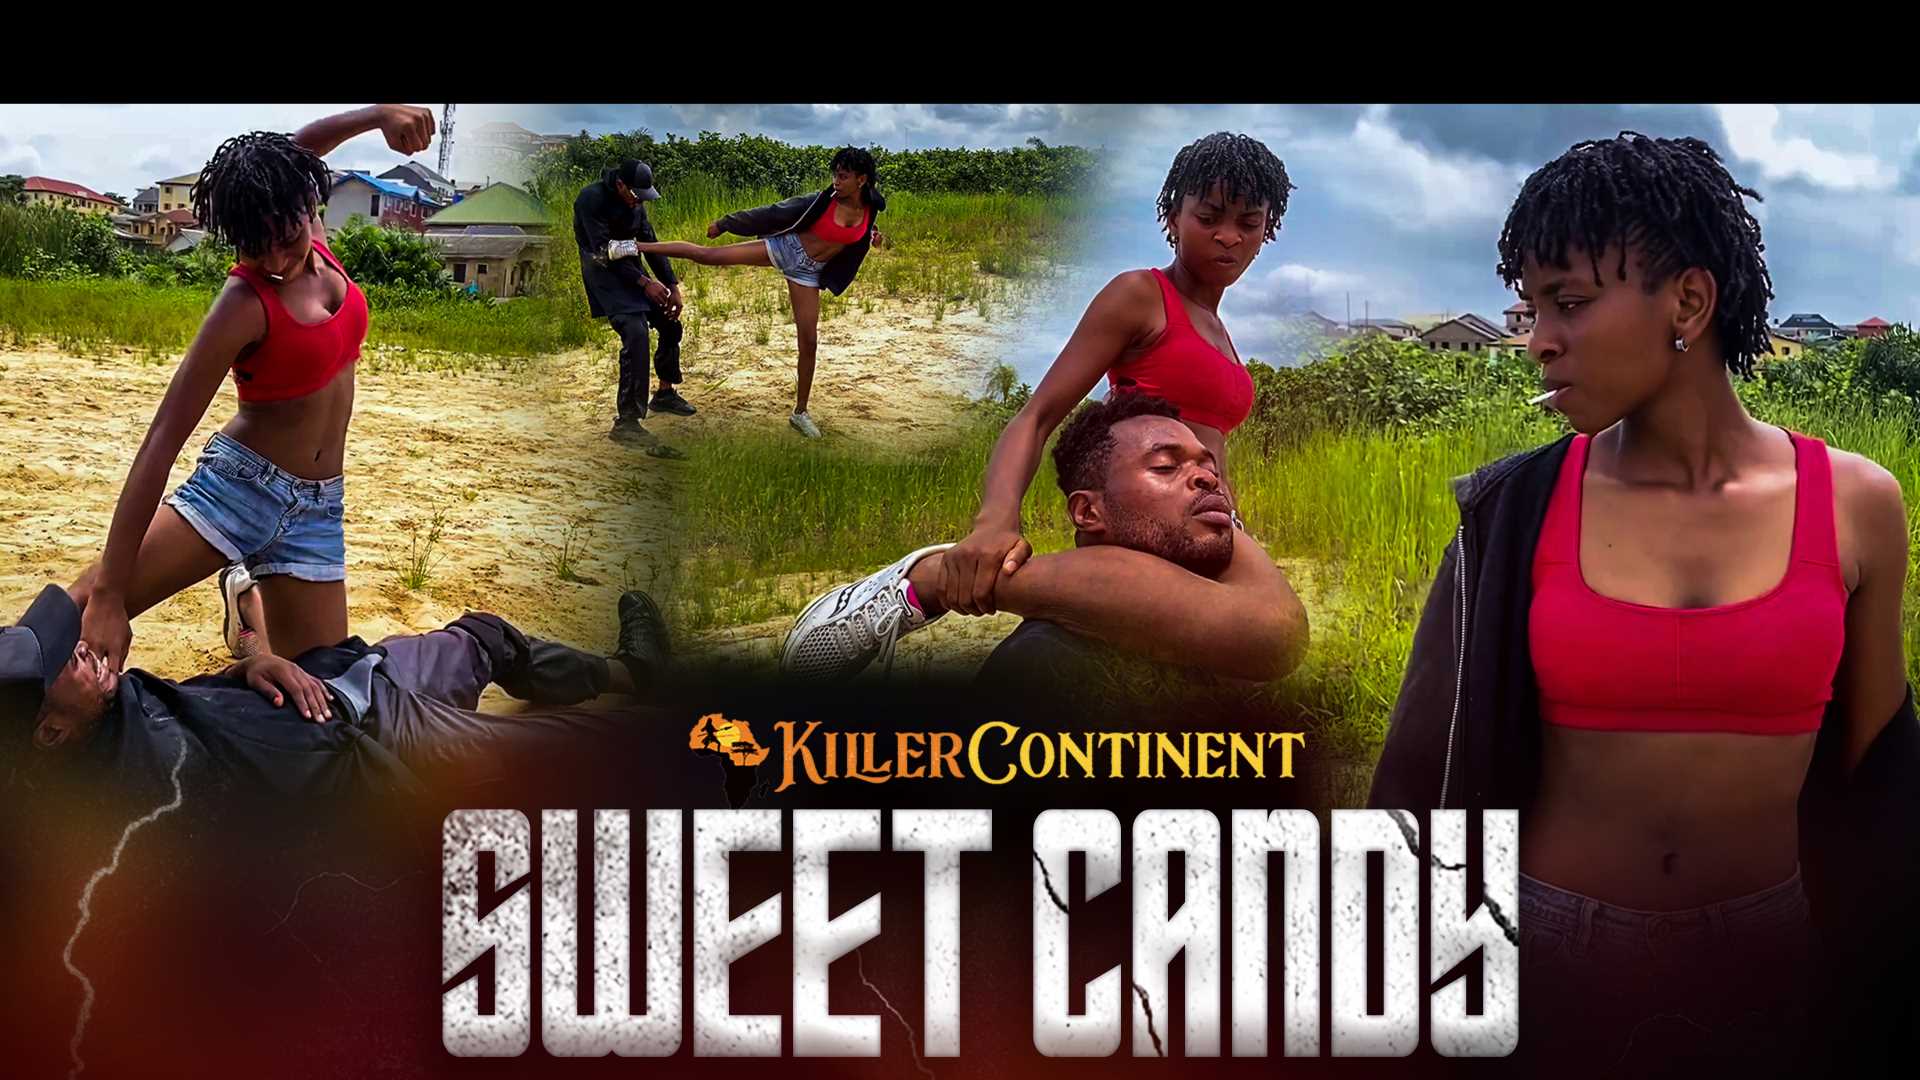 #6 - Sweet Candy